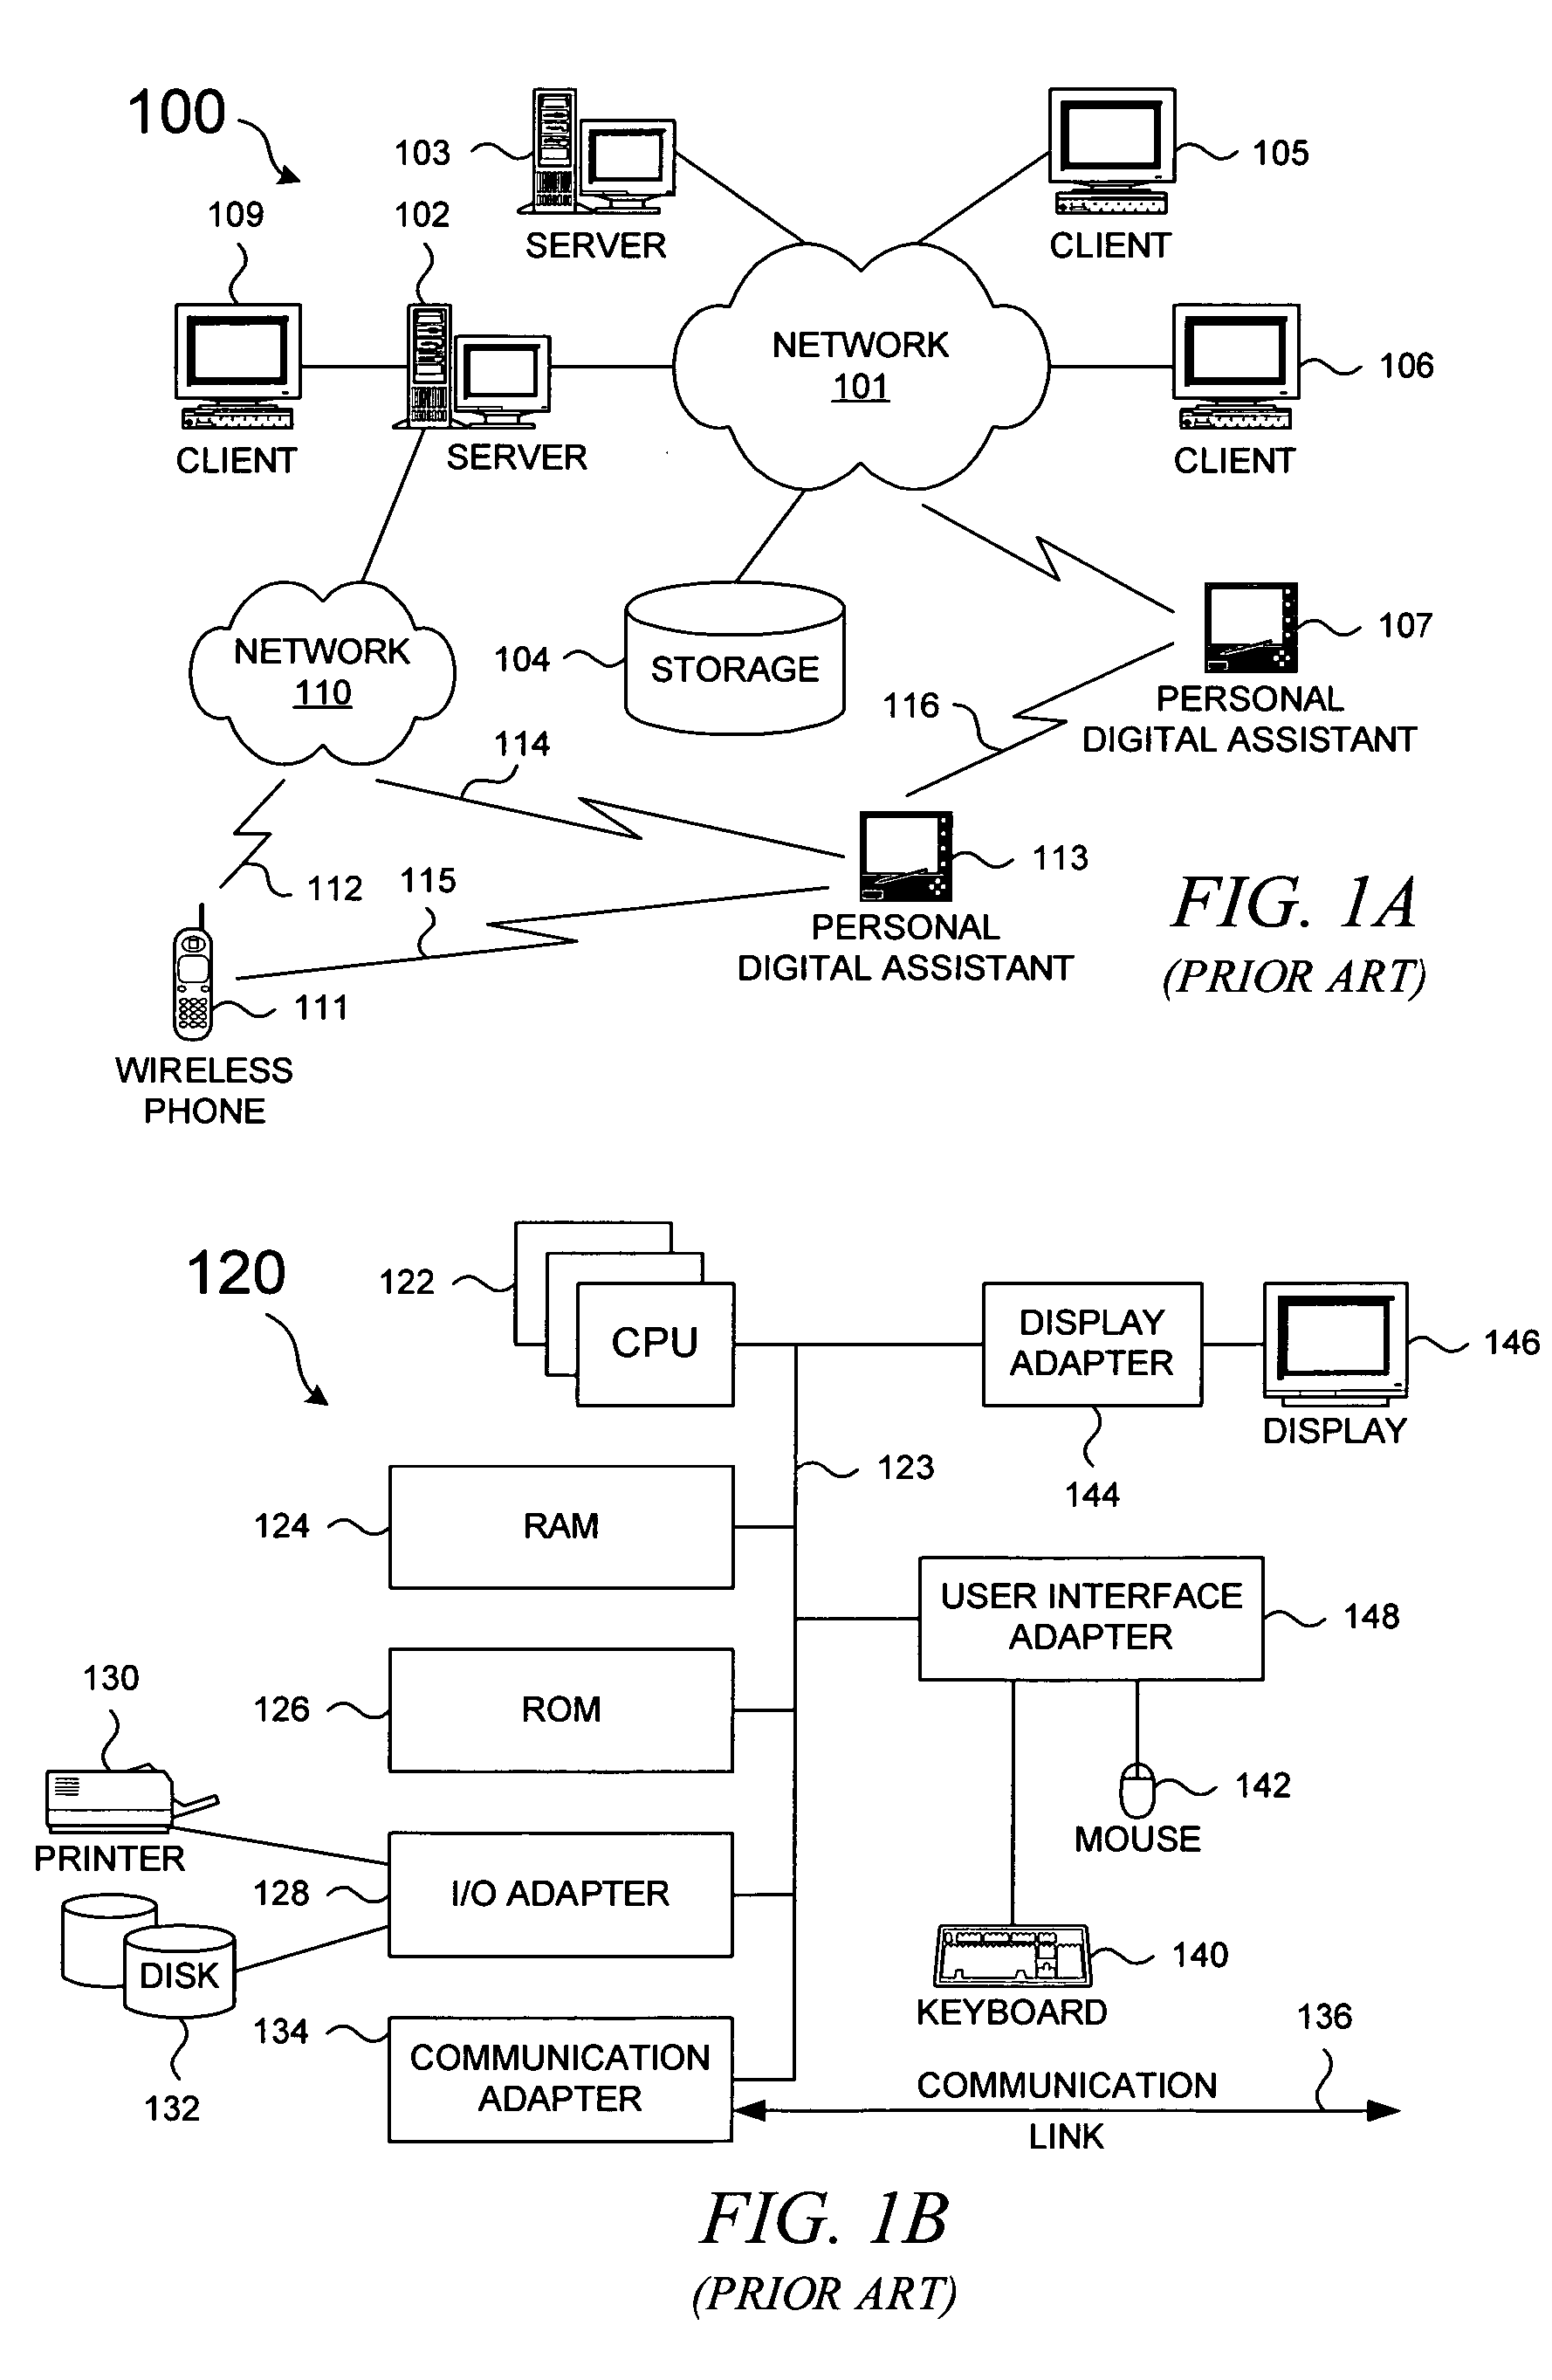 Method and system for multi-instance session support in a load-balanced environment